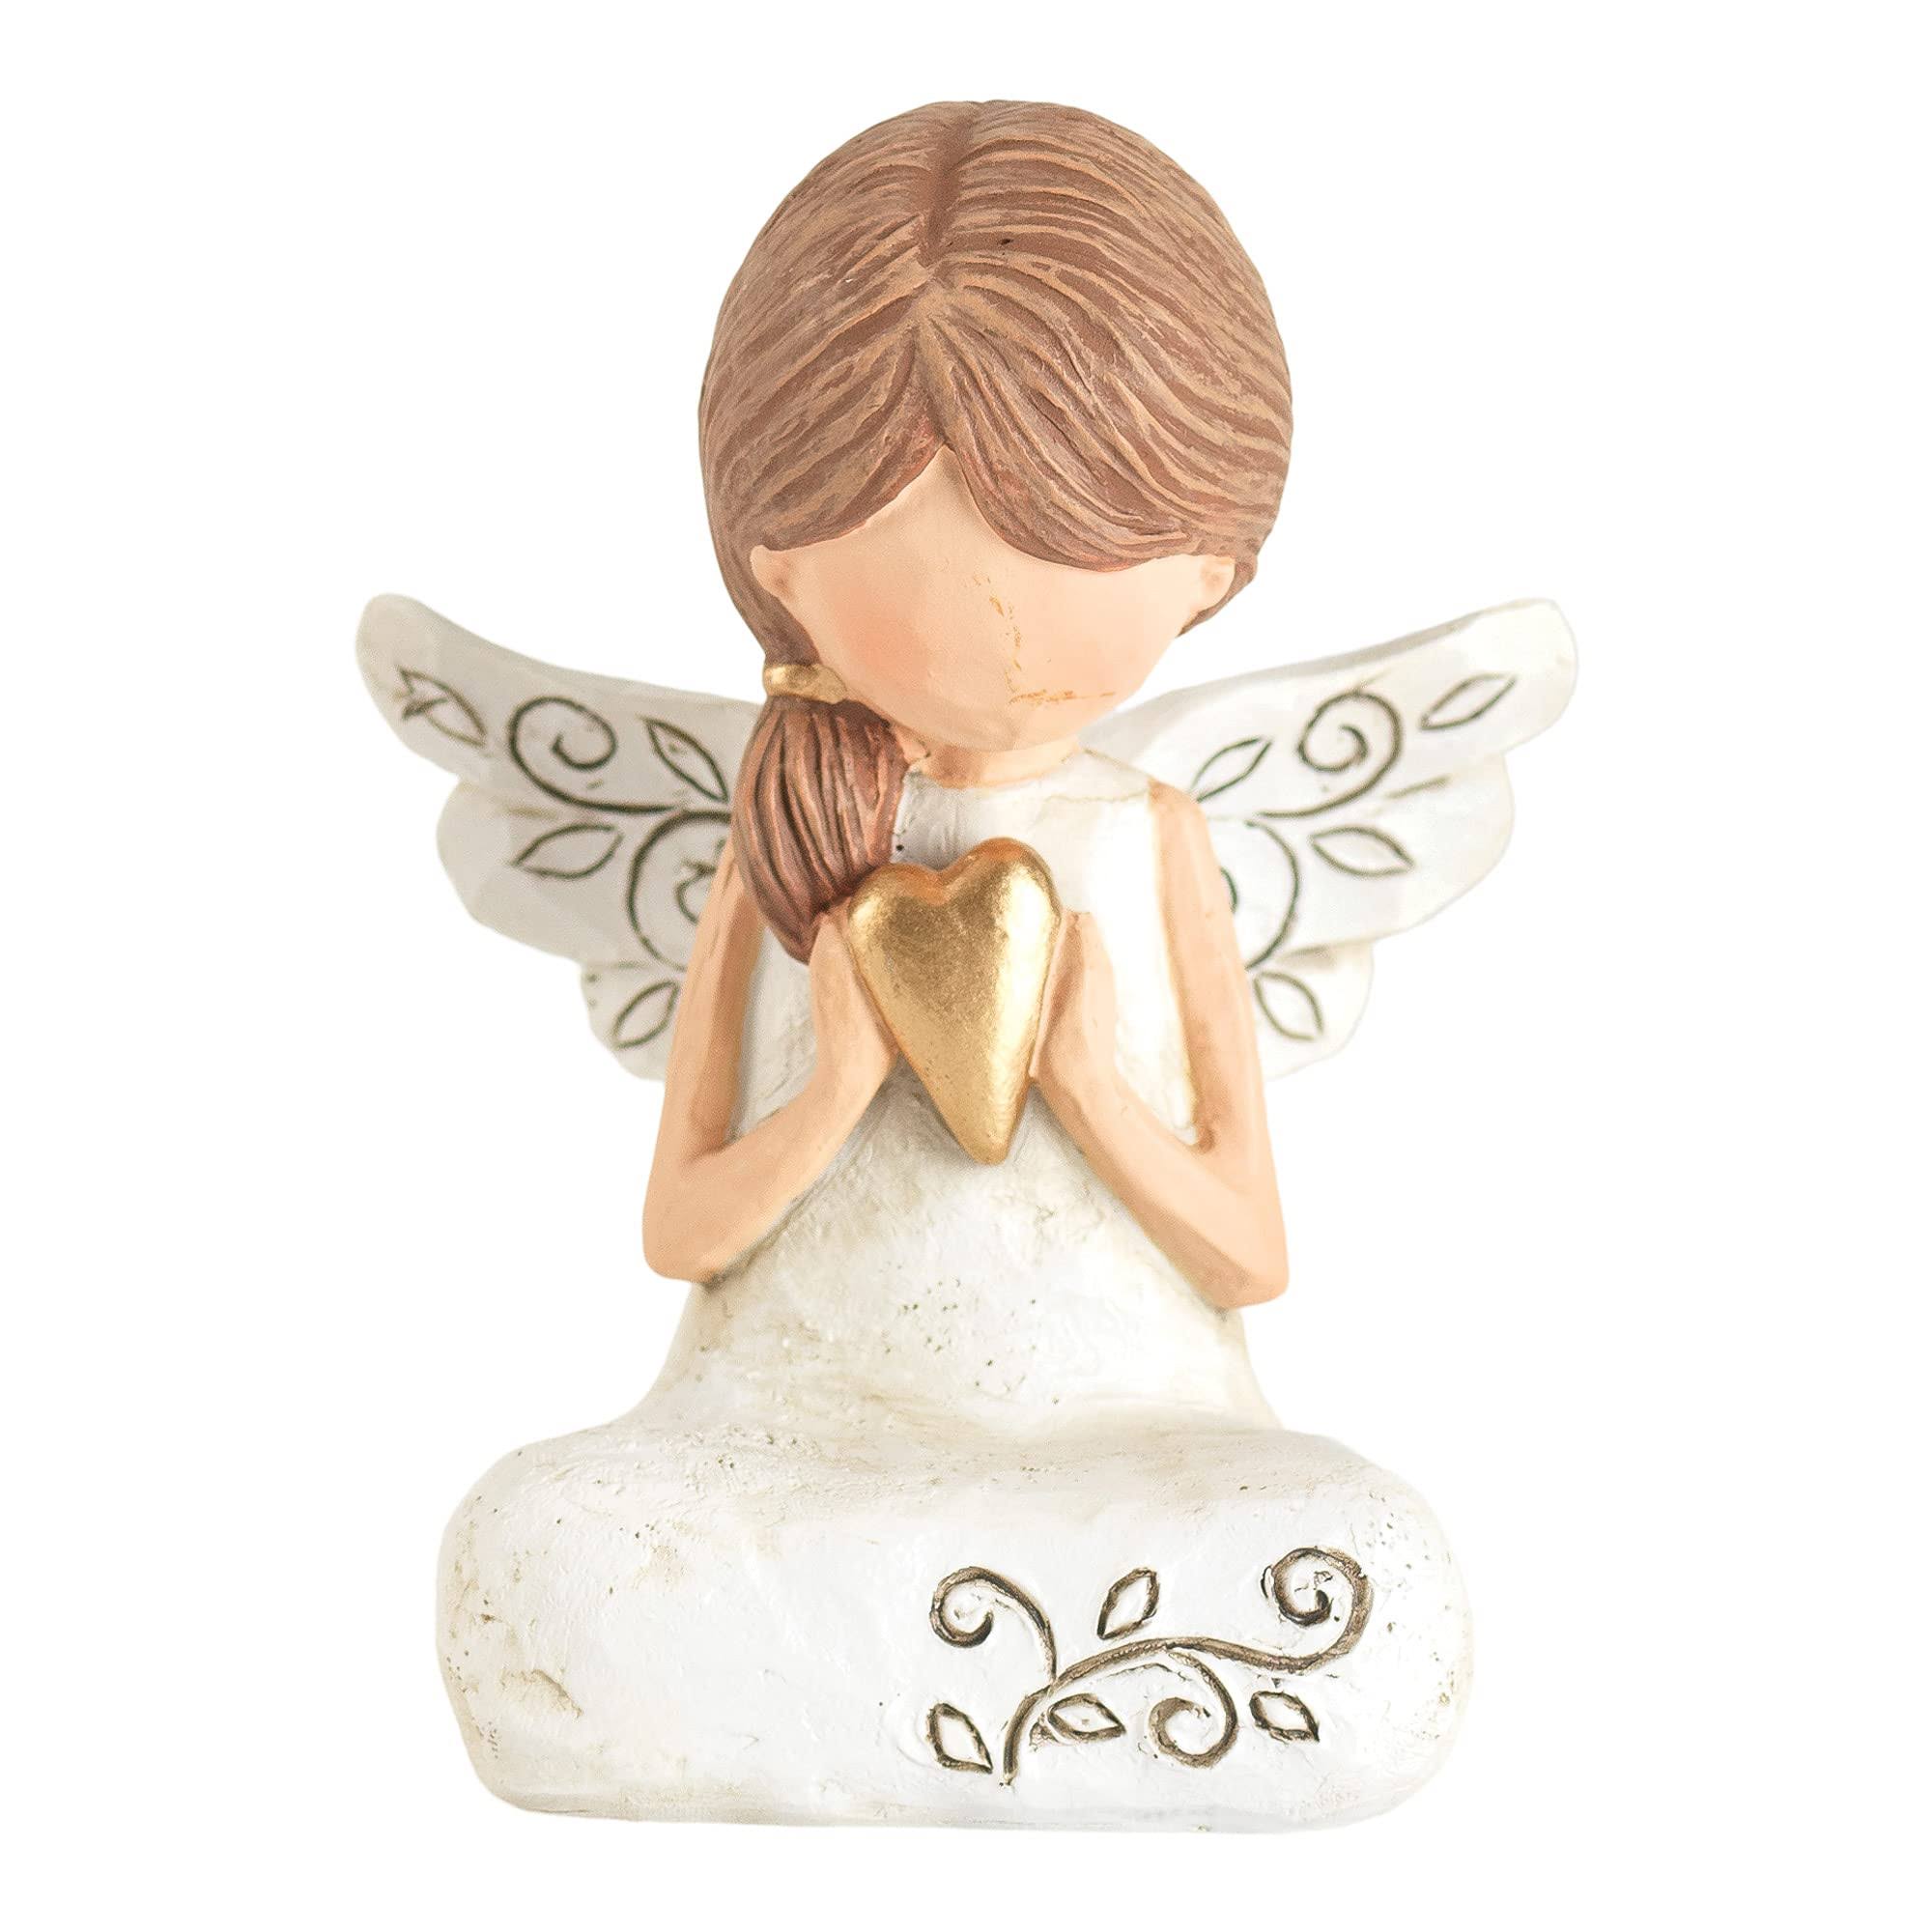 Dicksons Weathered White Angel with Heart 3 x 2.25 Resin Decorative Tabletop Figurine